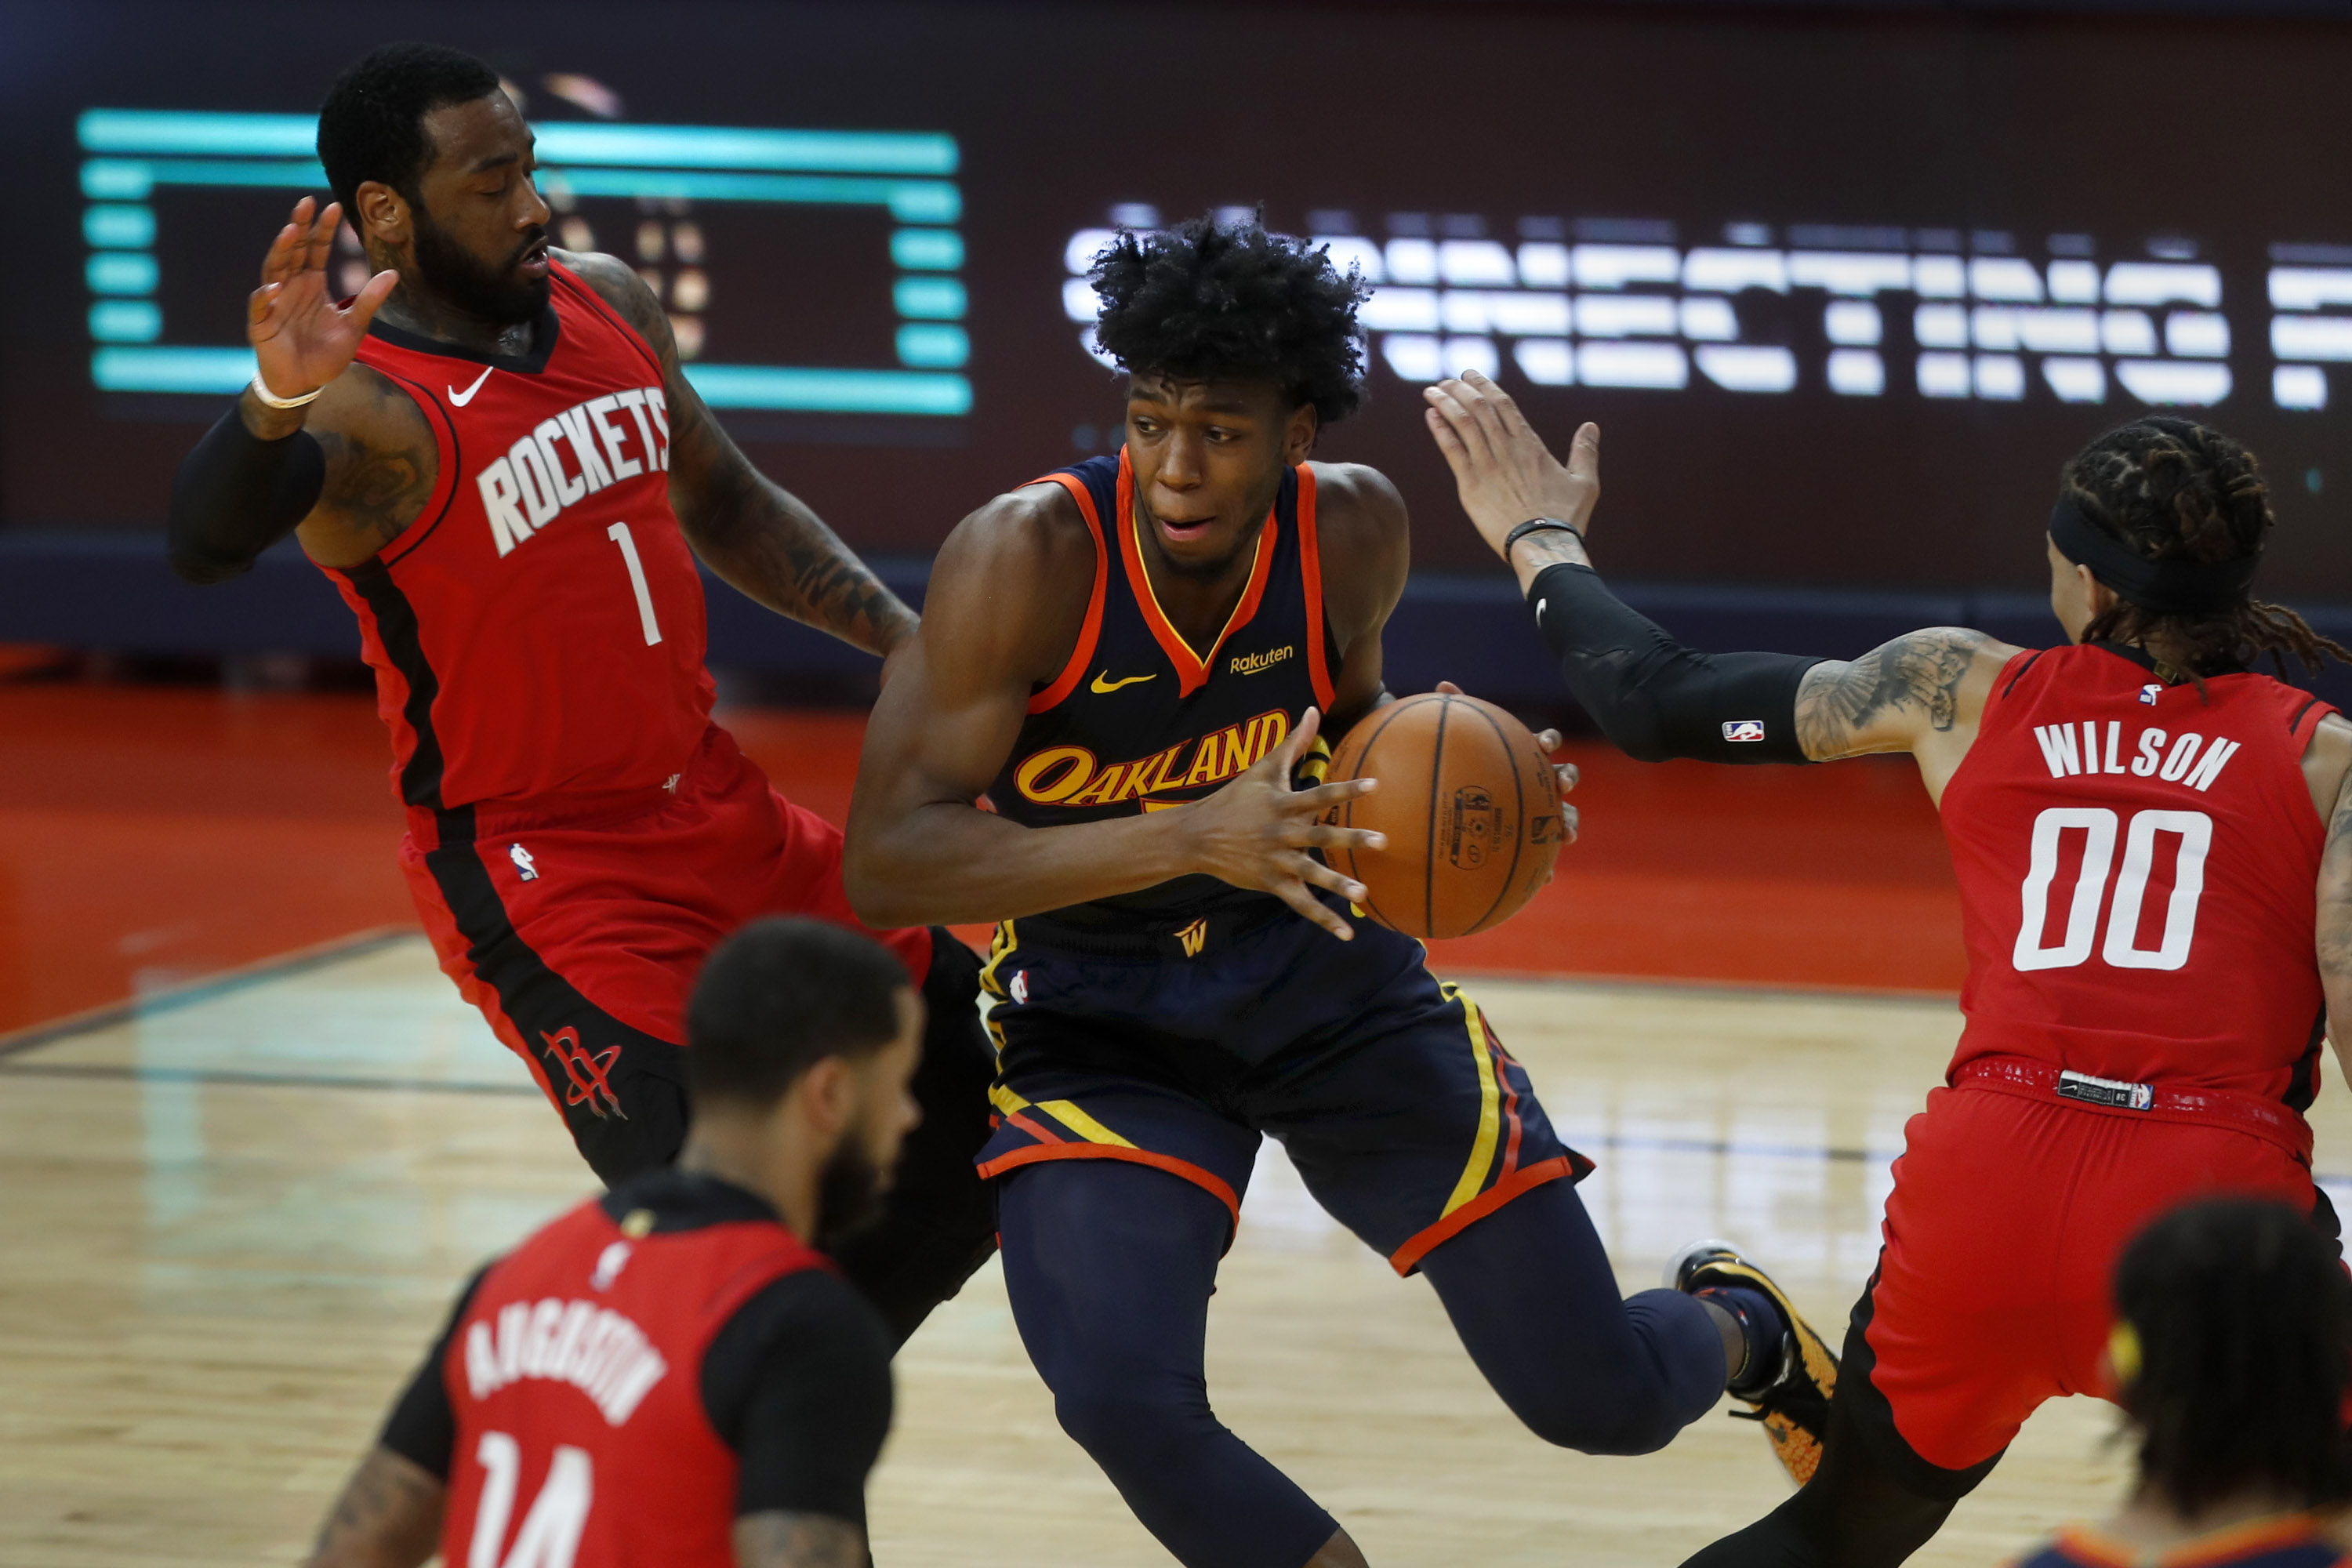 SAN FRANCISCO, CA - APRIL 10: Golden State Warriors' James Wiseman (33) drives on the Houston Rockets' ArmoniBrooks (1) in the first quarter of their basketball game, Saturday, April 10, 2021, at Chase Center in San Francisco, Calif. (Karl Mondon/Bay Area News Group)